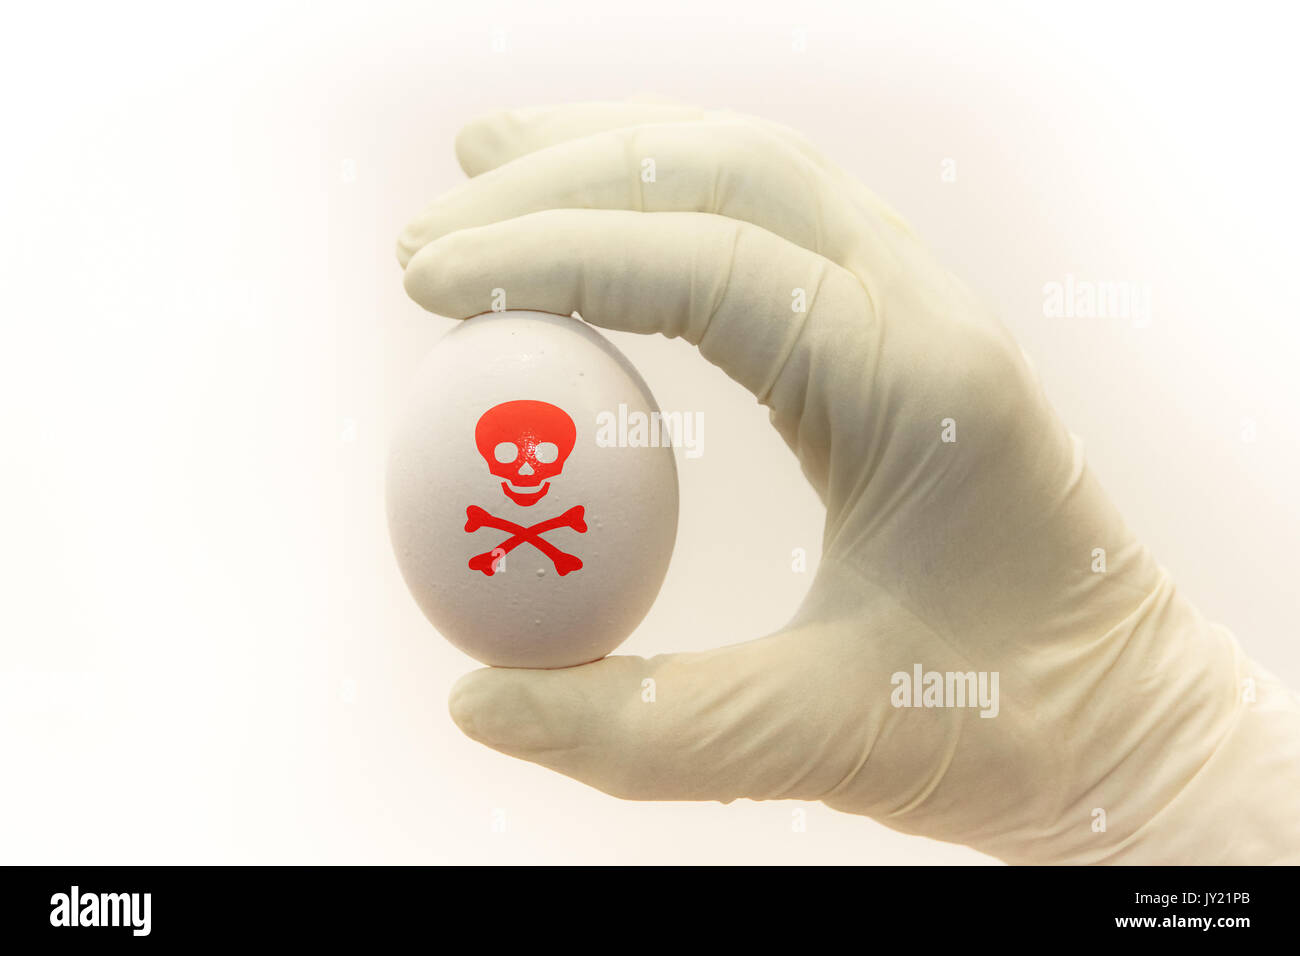 Isolated egg under investigation beig examined with surgical gloves with a poison dangerous symbol painted over. Concept image for food contamination  Stock Photo